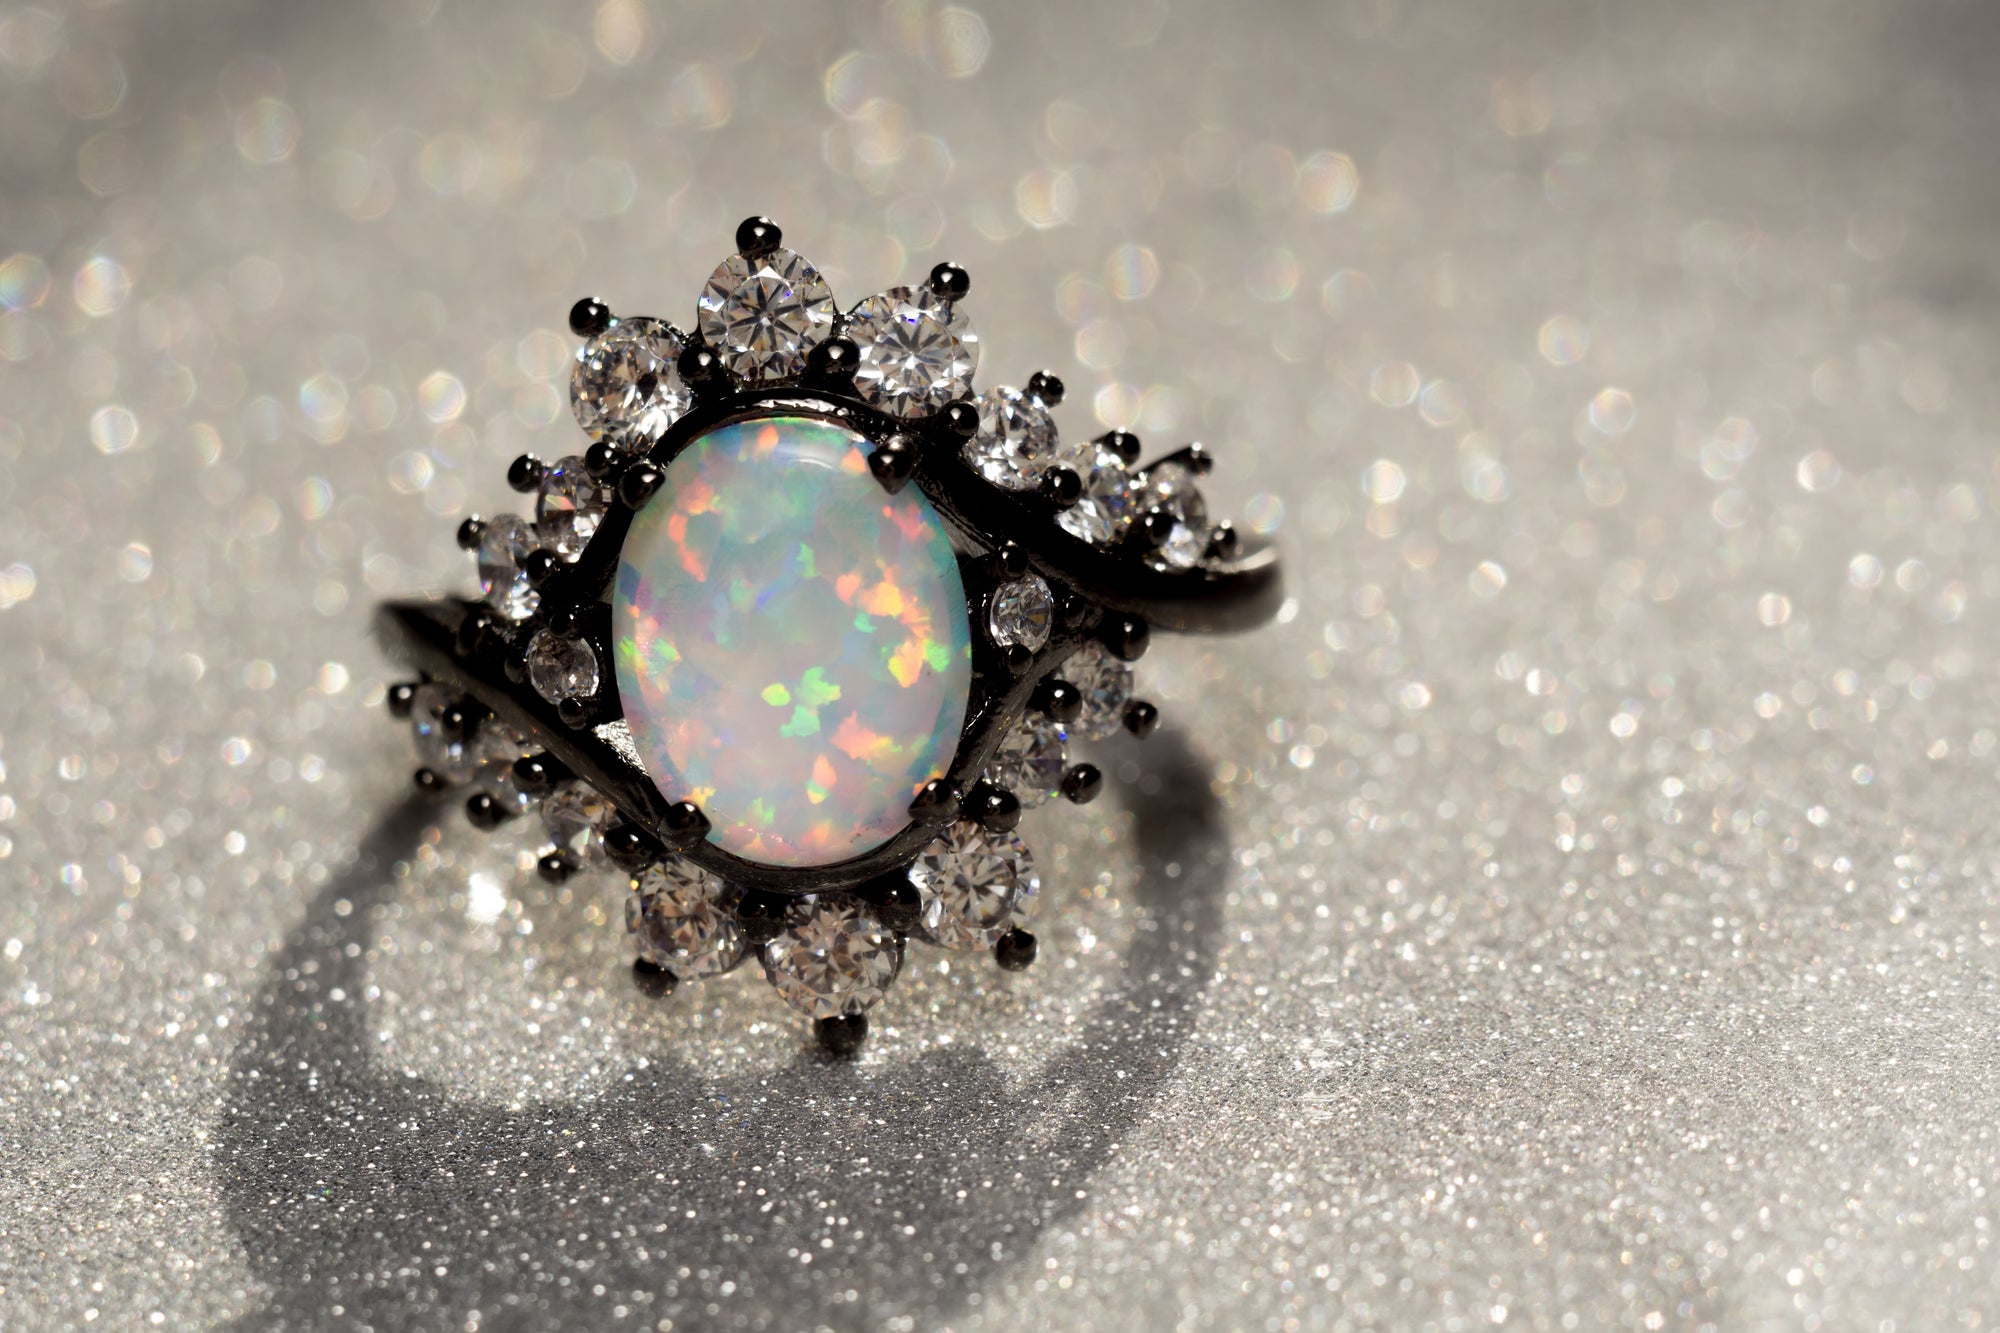 Opal's Bad Luck - Dangerous and Beautiful?